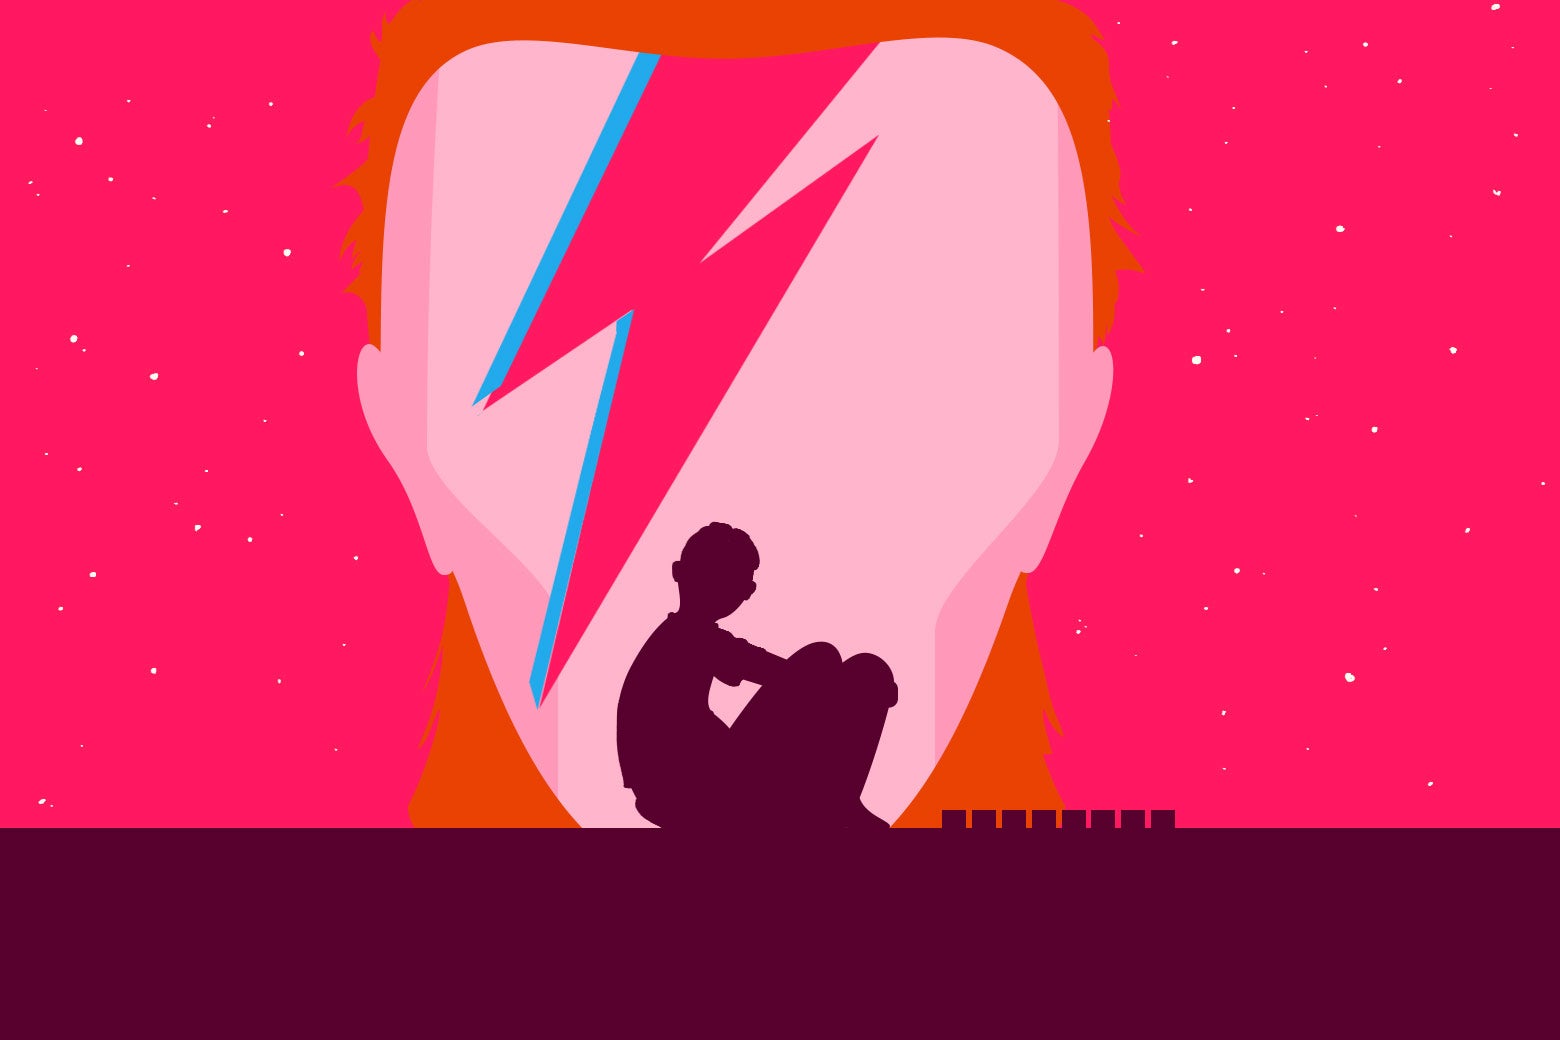 An illustration of a boy sitting in profile in front of a Ziggy Stardust–era David Bowie.